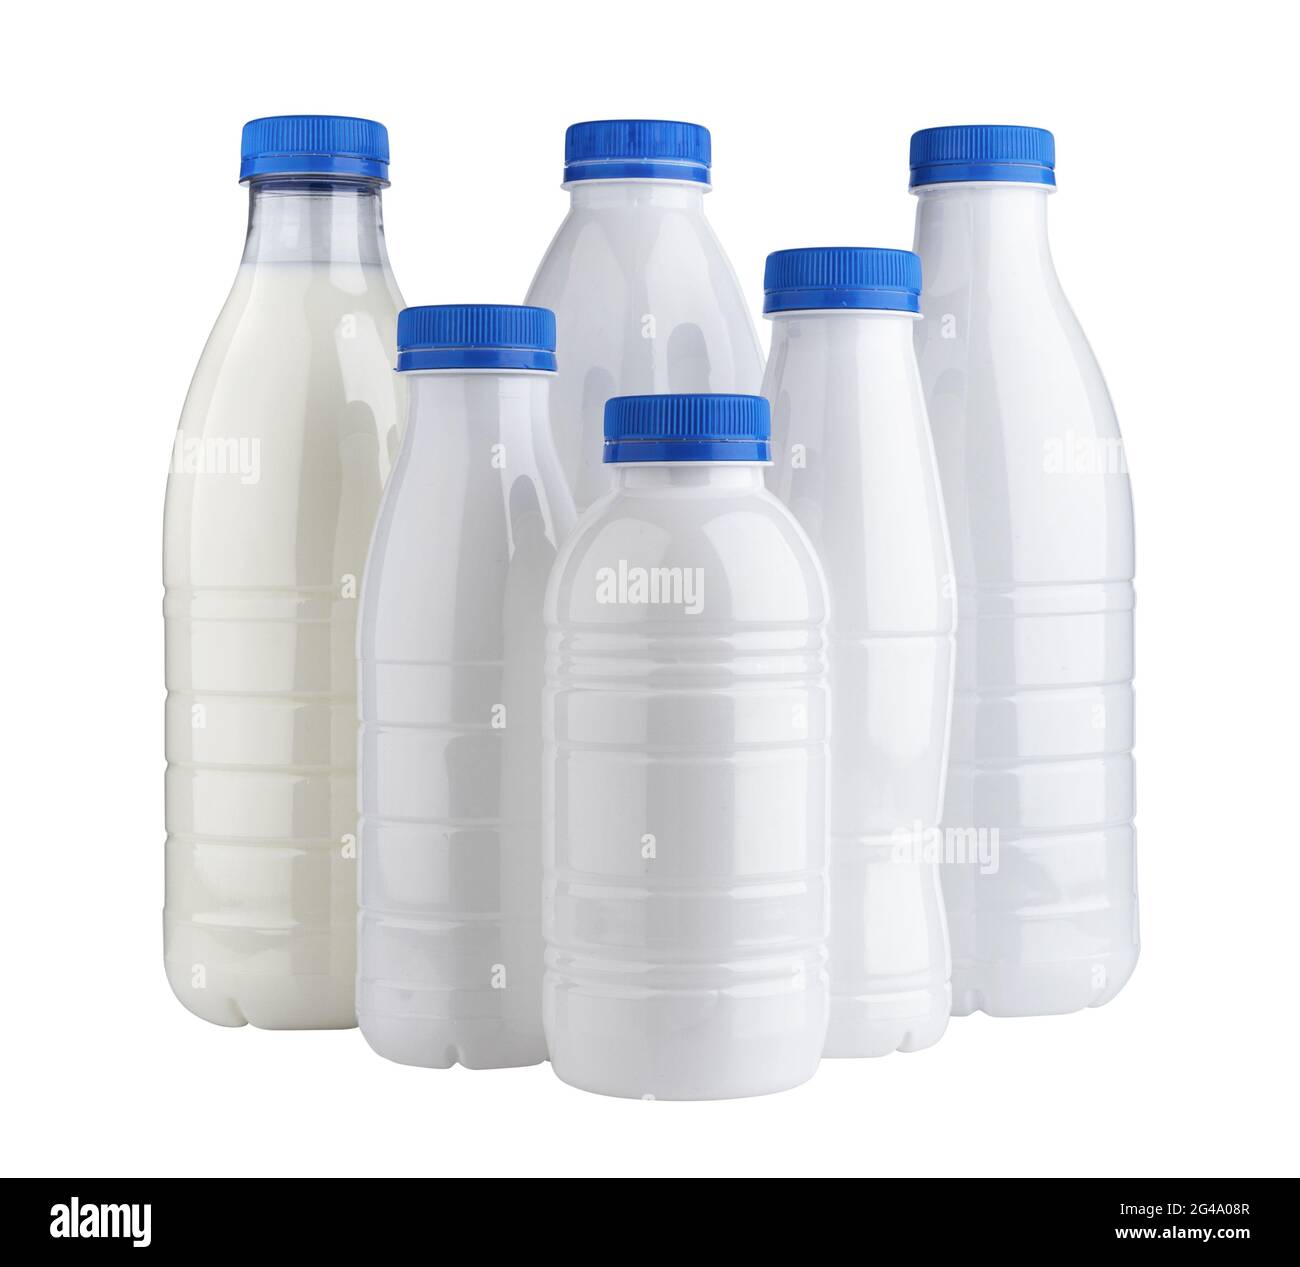 https://c8.alamy.com/comp/2G4A08R/plastic-bottles-for-milk-and-yogurt-isolated-on-white-background-2G4A08R.jpg